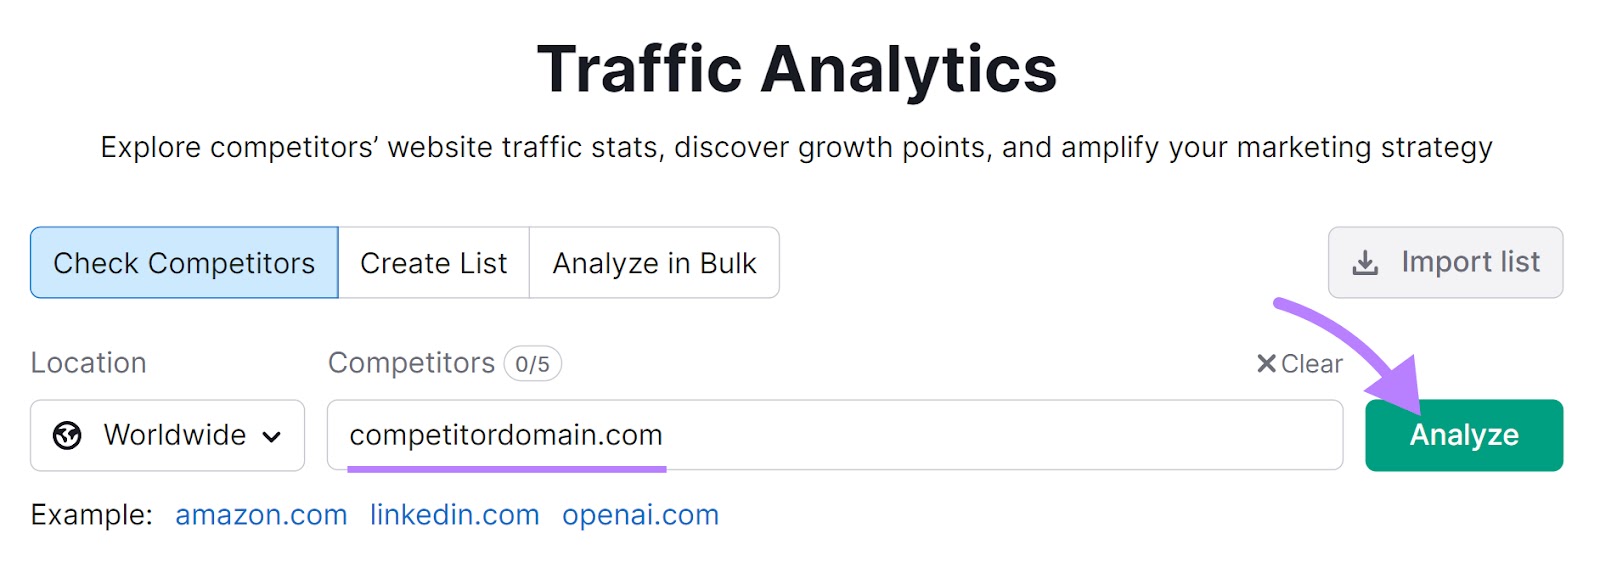 Check competitors with Traffic Analytics tool